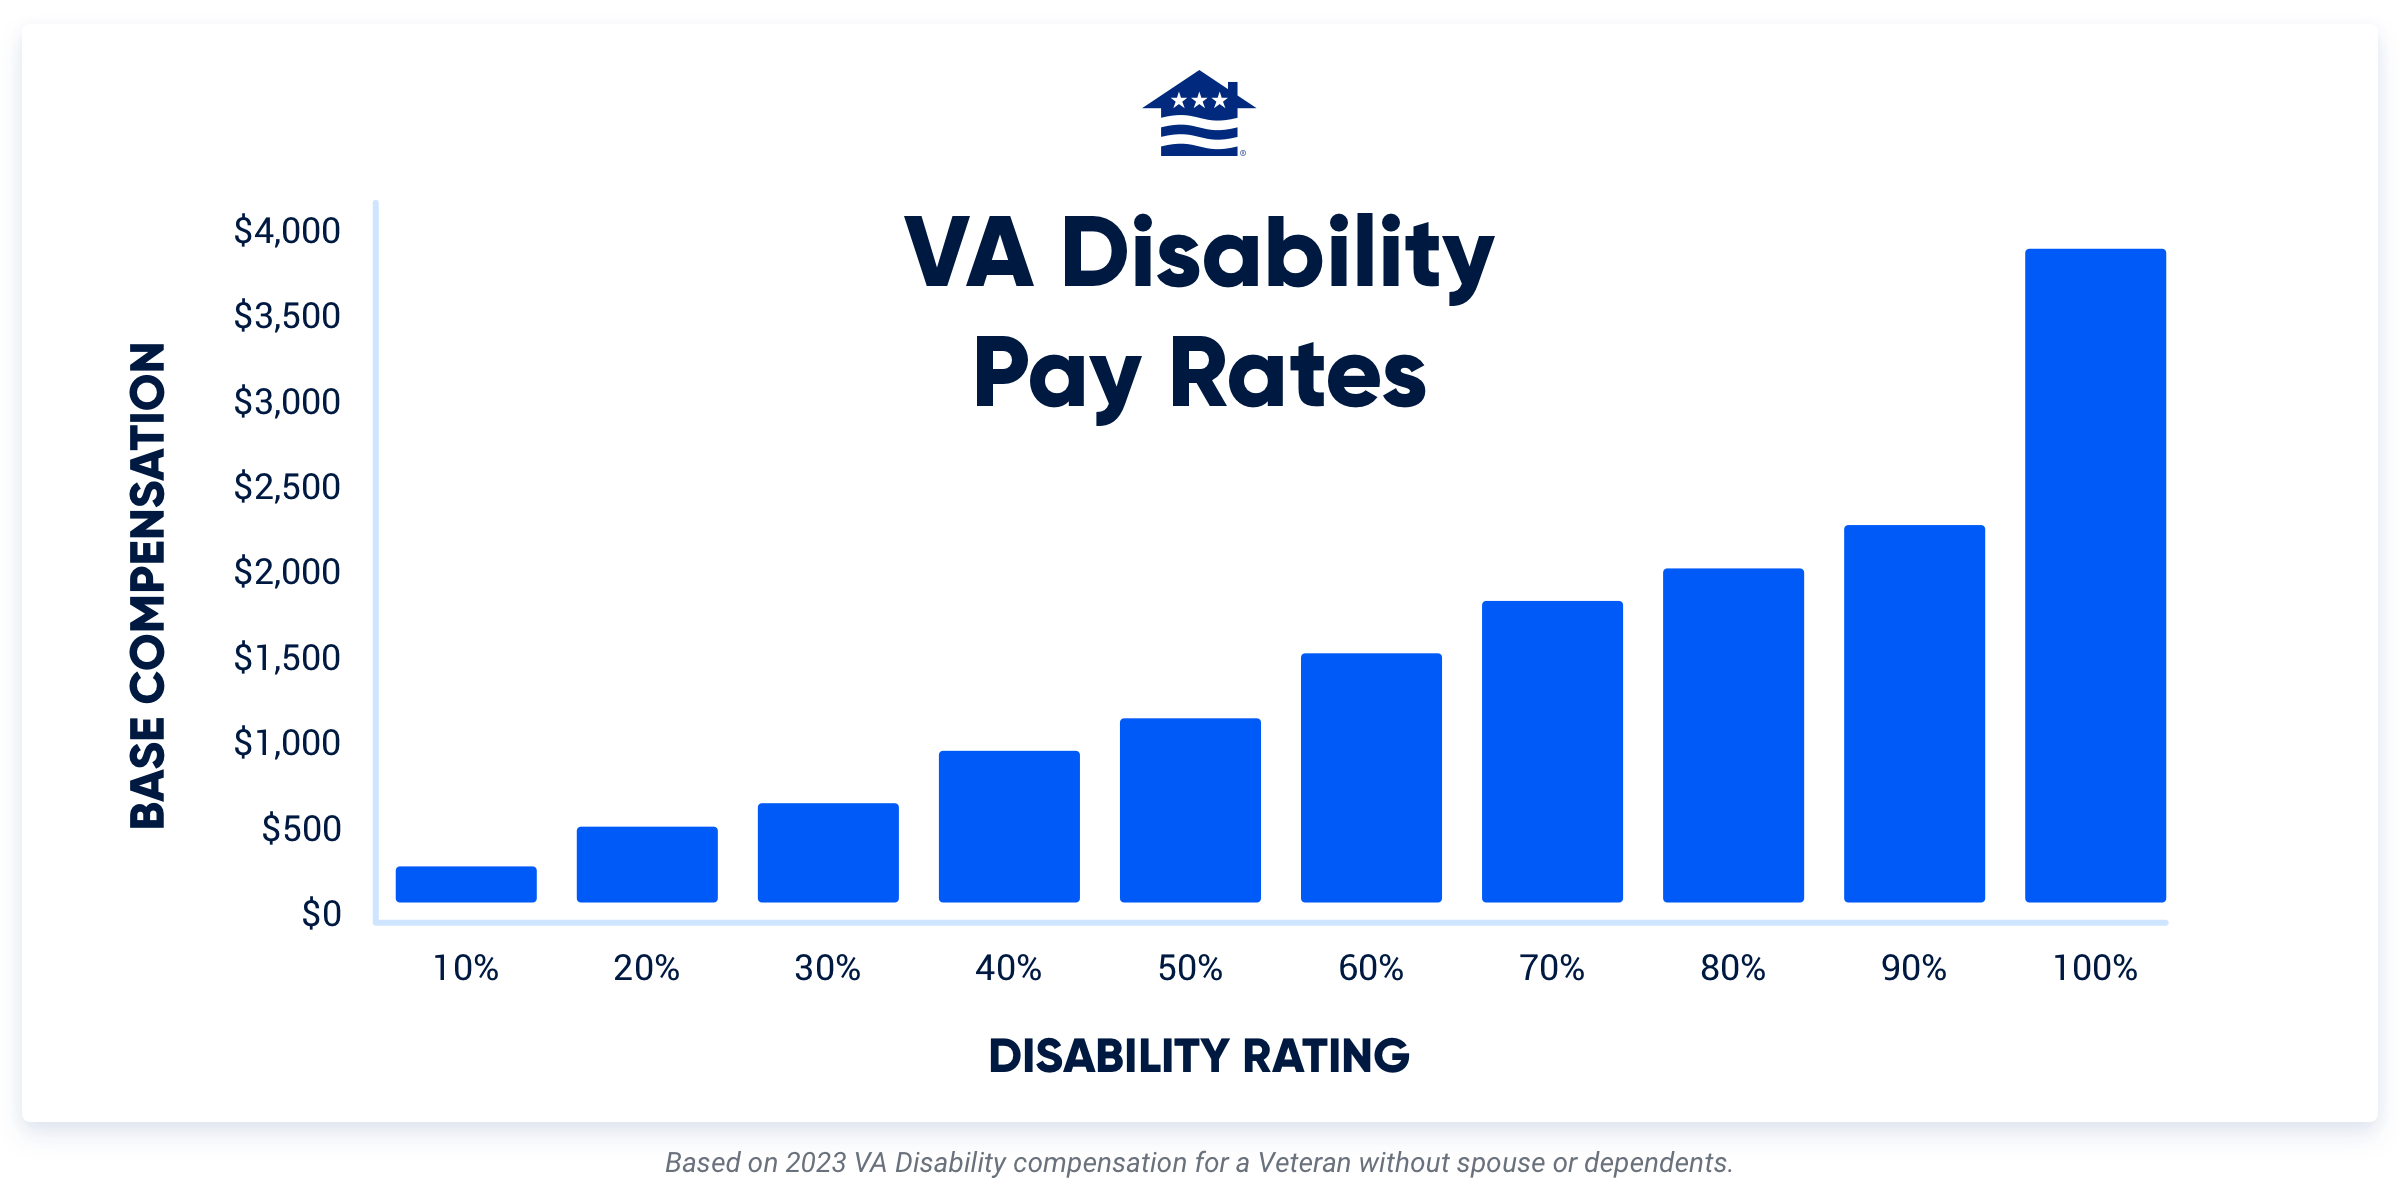 Chart that shows the relationship between disability rating and compensation rate.